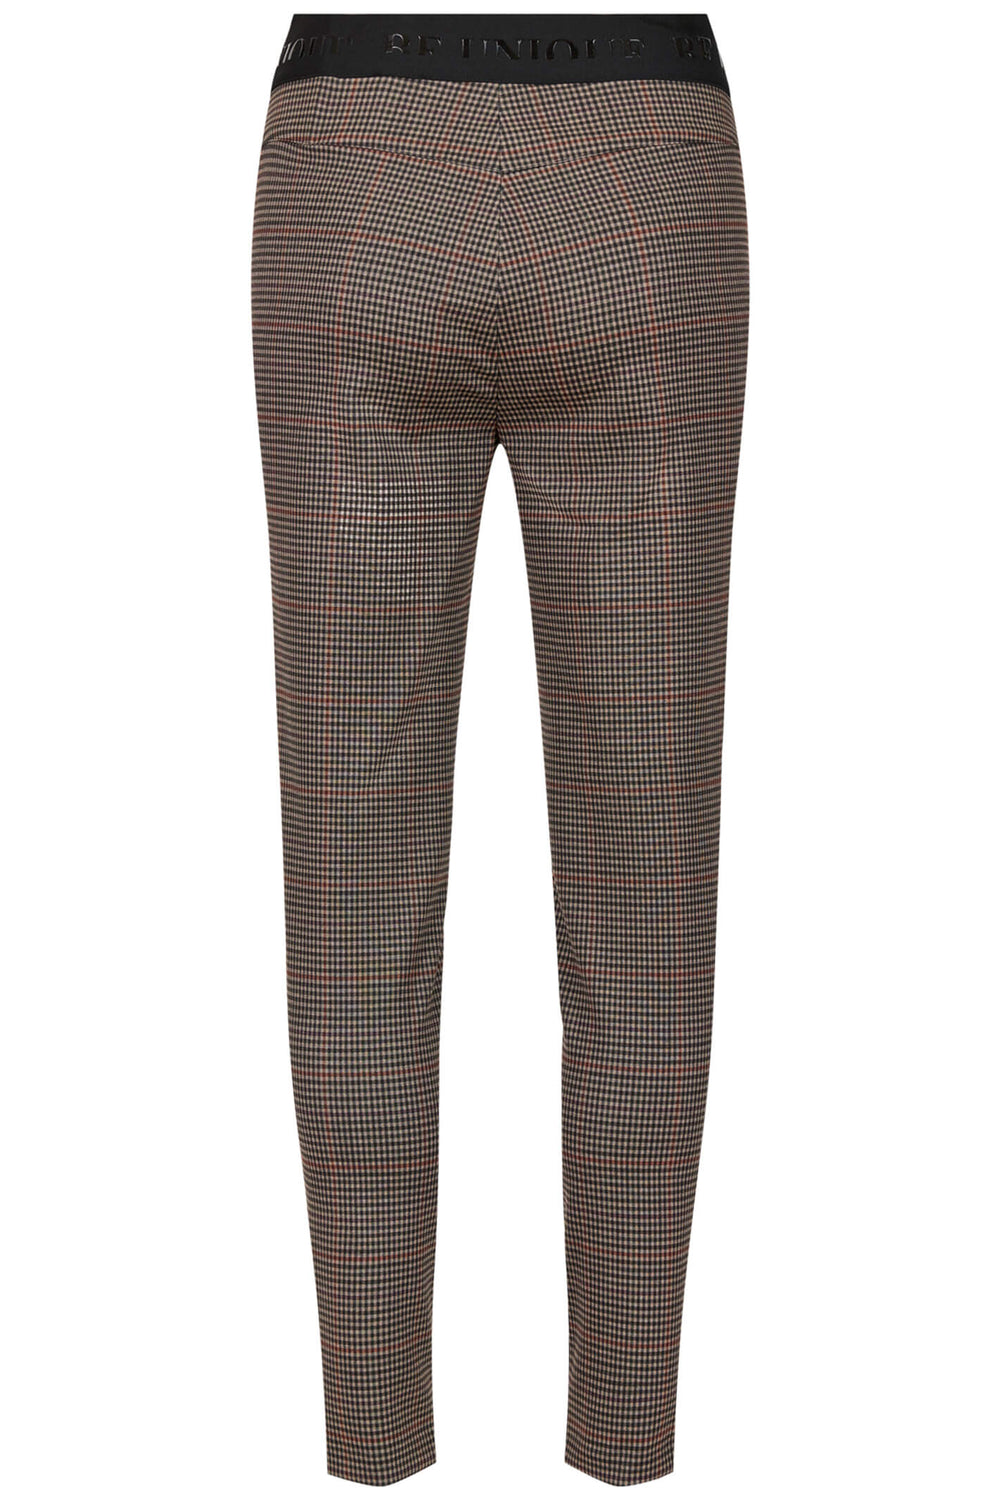 Robell 52629 38 Brown Check Nelly Trousers - Experience Boutique